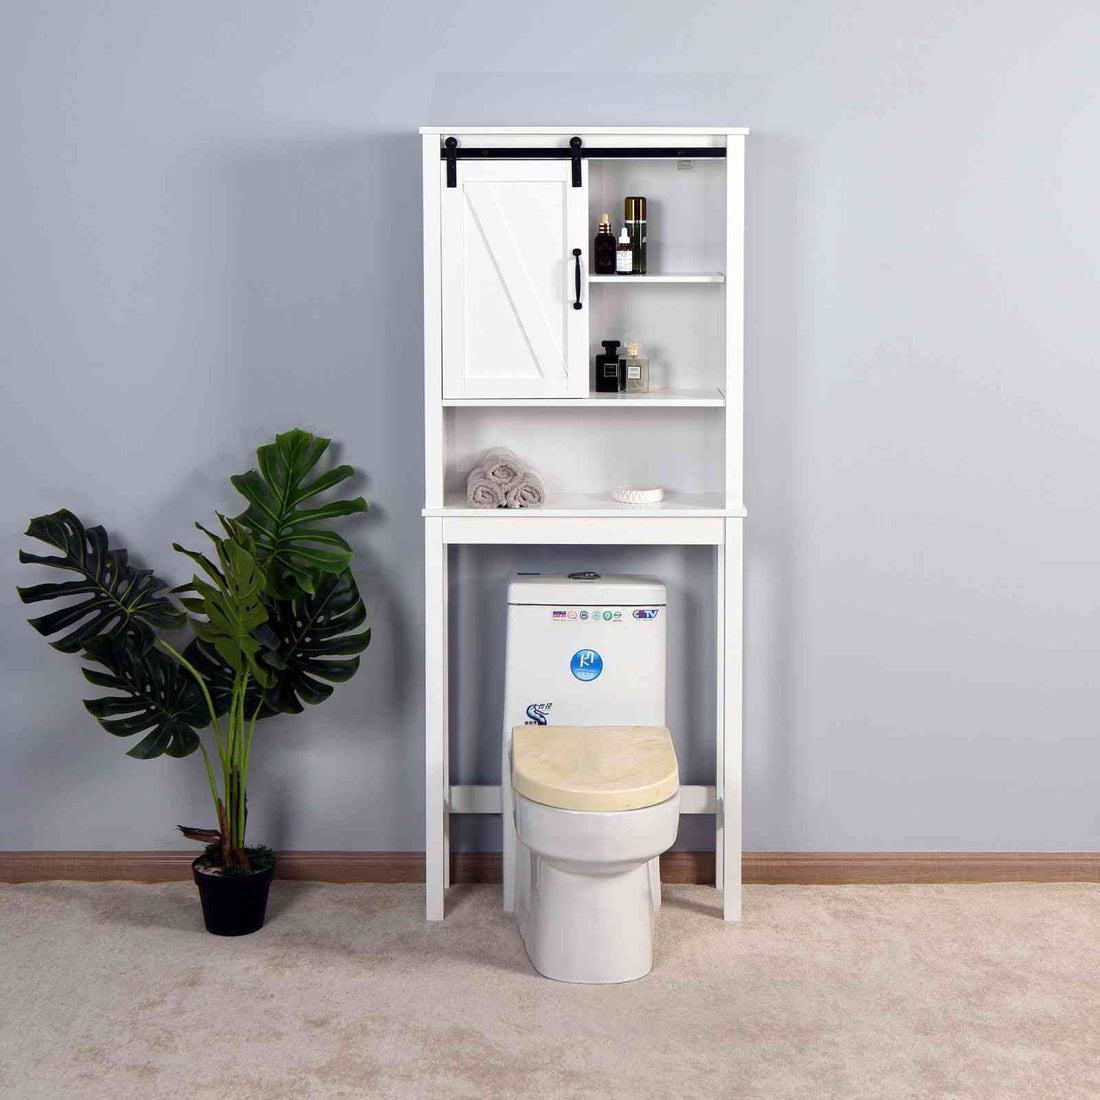 Adjustable White Over Toilet Storage Cabinet with Barn Door for Space Efficiently